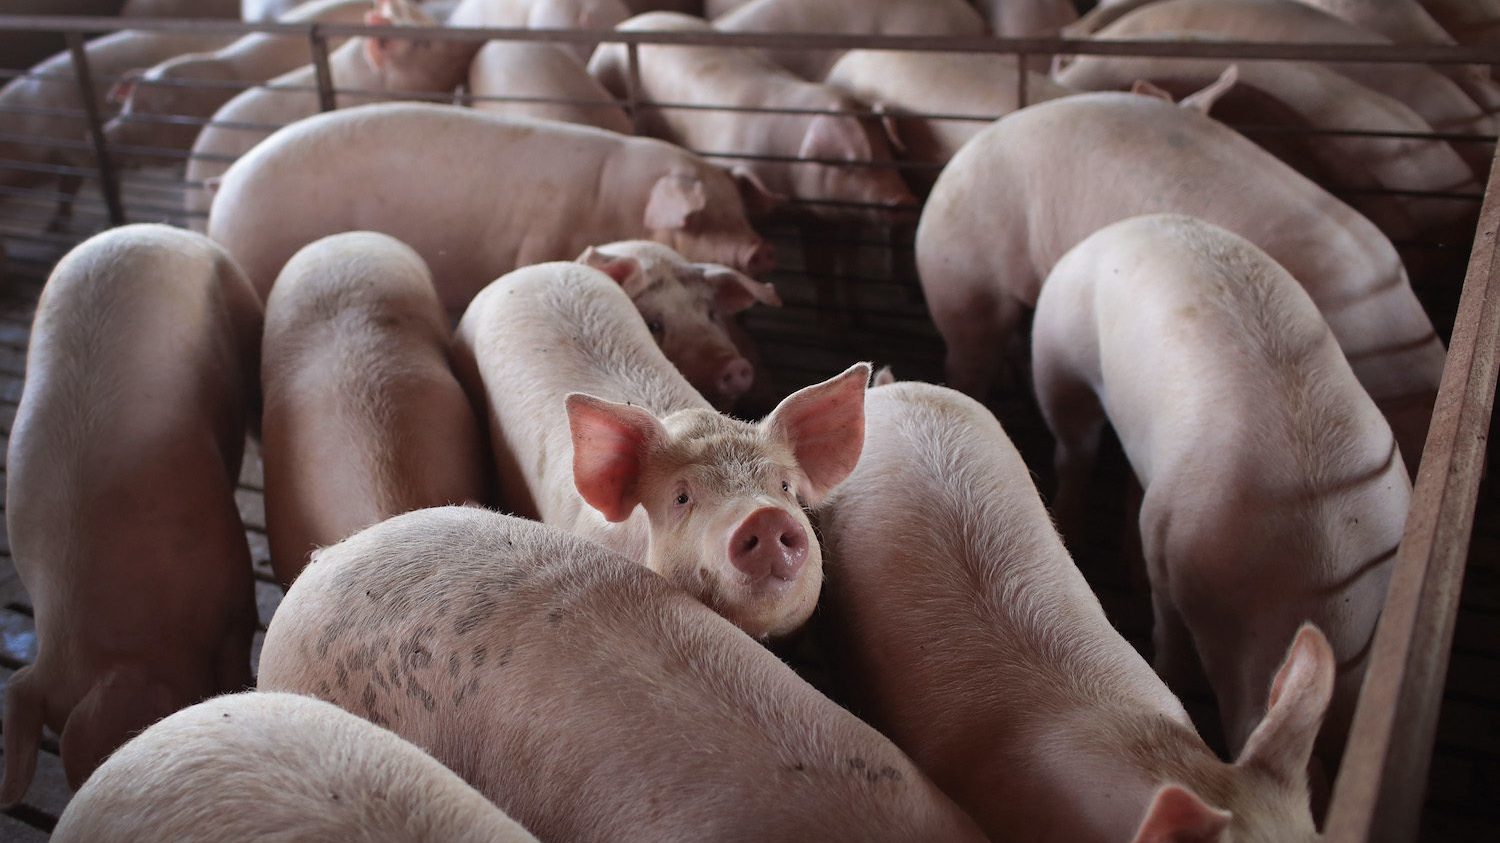 Hogs are raised on the farm of Ted Fox on July 25, 2018 near Osage, Iowa. According to the Iowa Pork Producers Association, Iowa is the number one pork producing state in the U.S. and the top state for pork exports. March 2022